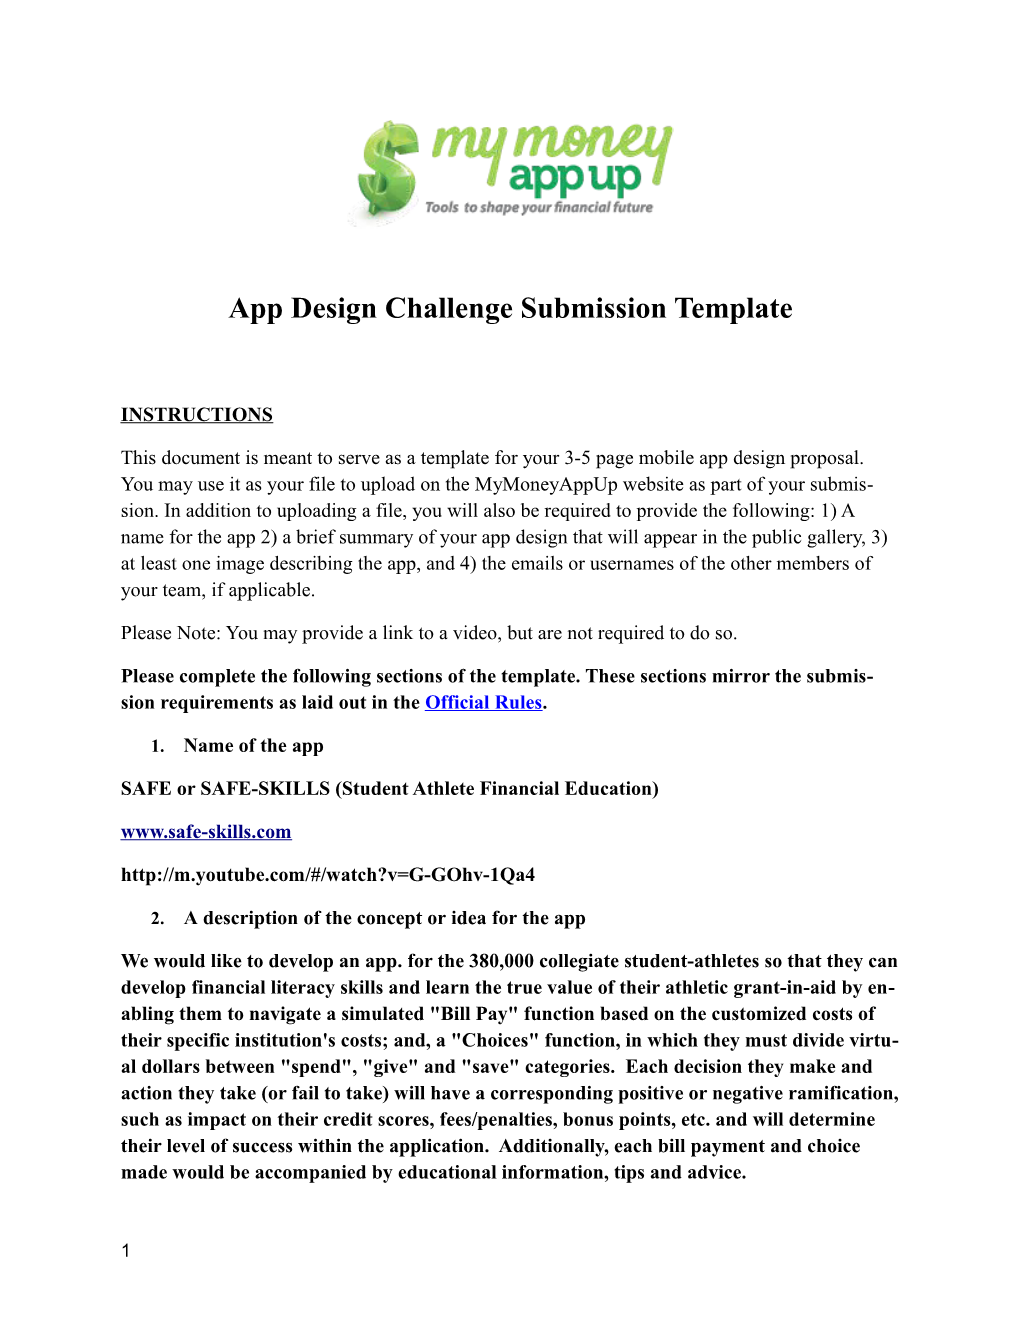 App Design Challenge Submission Template